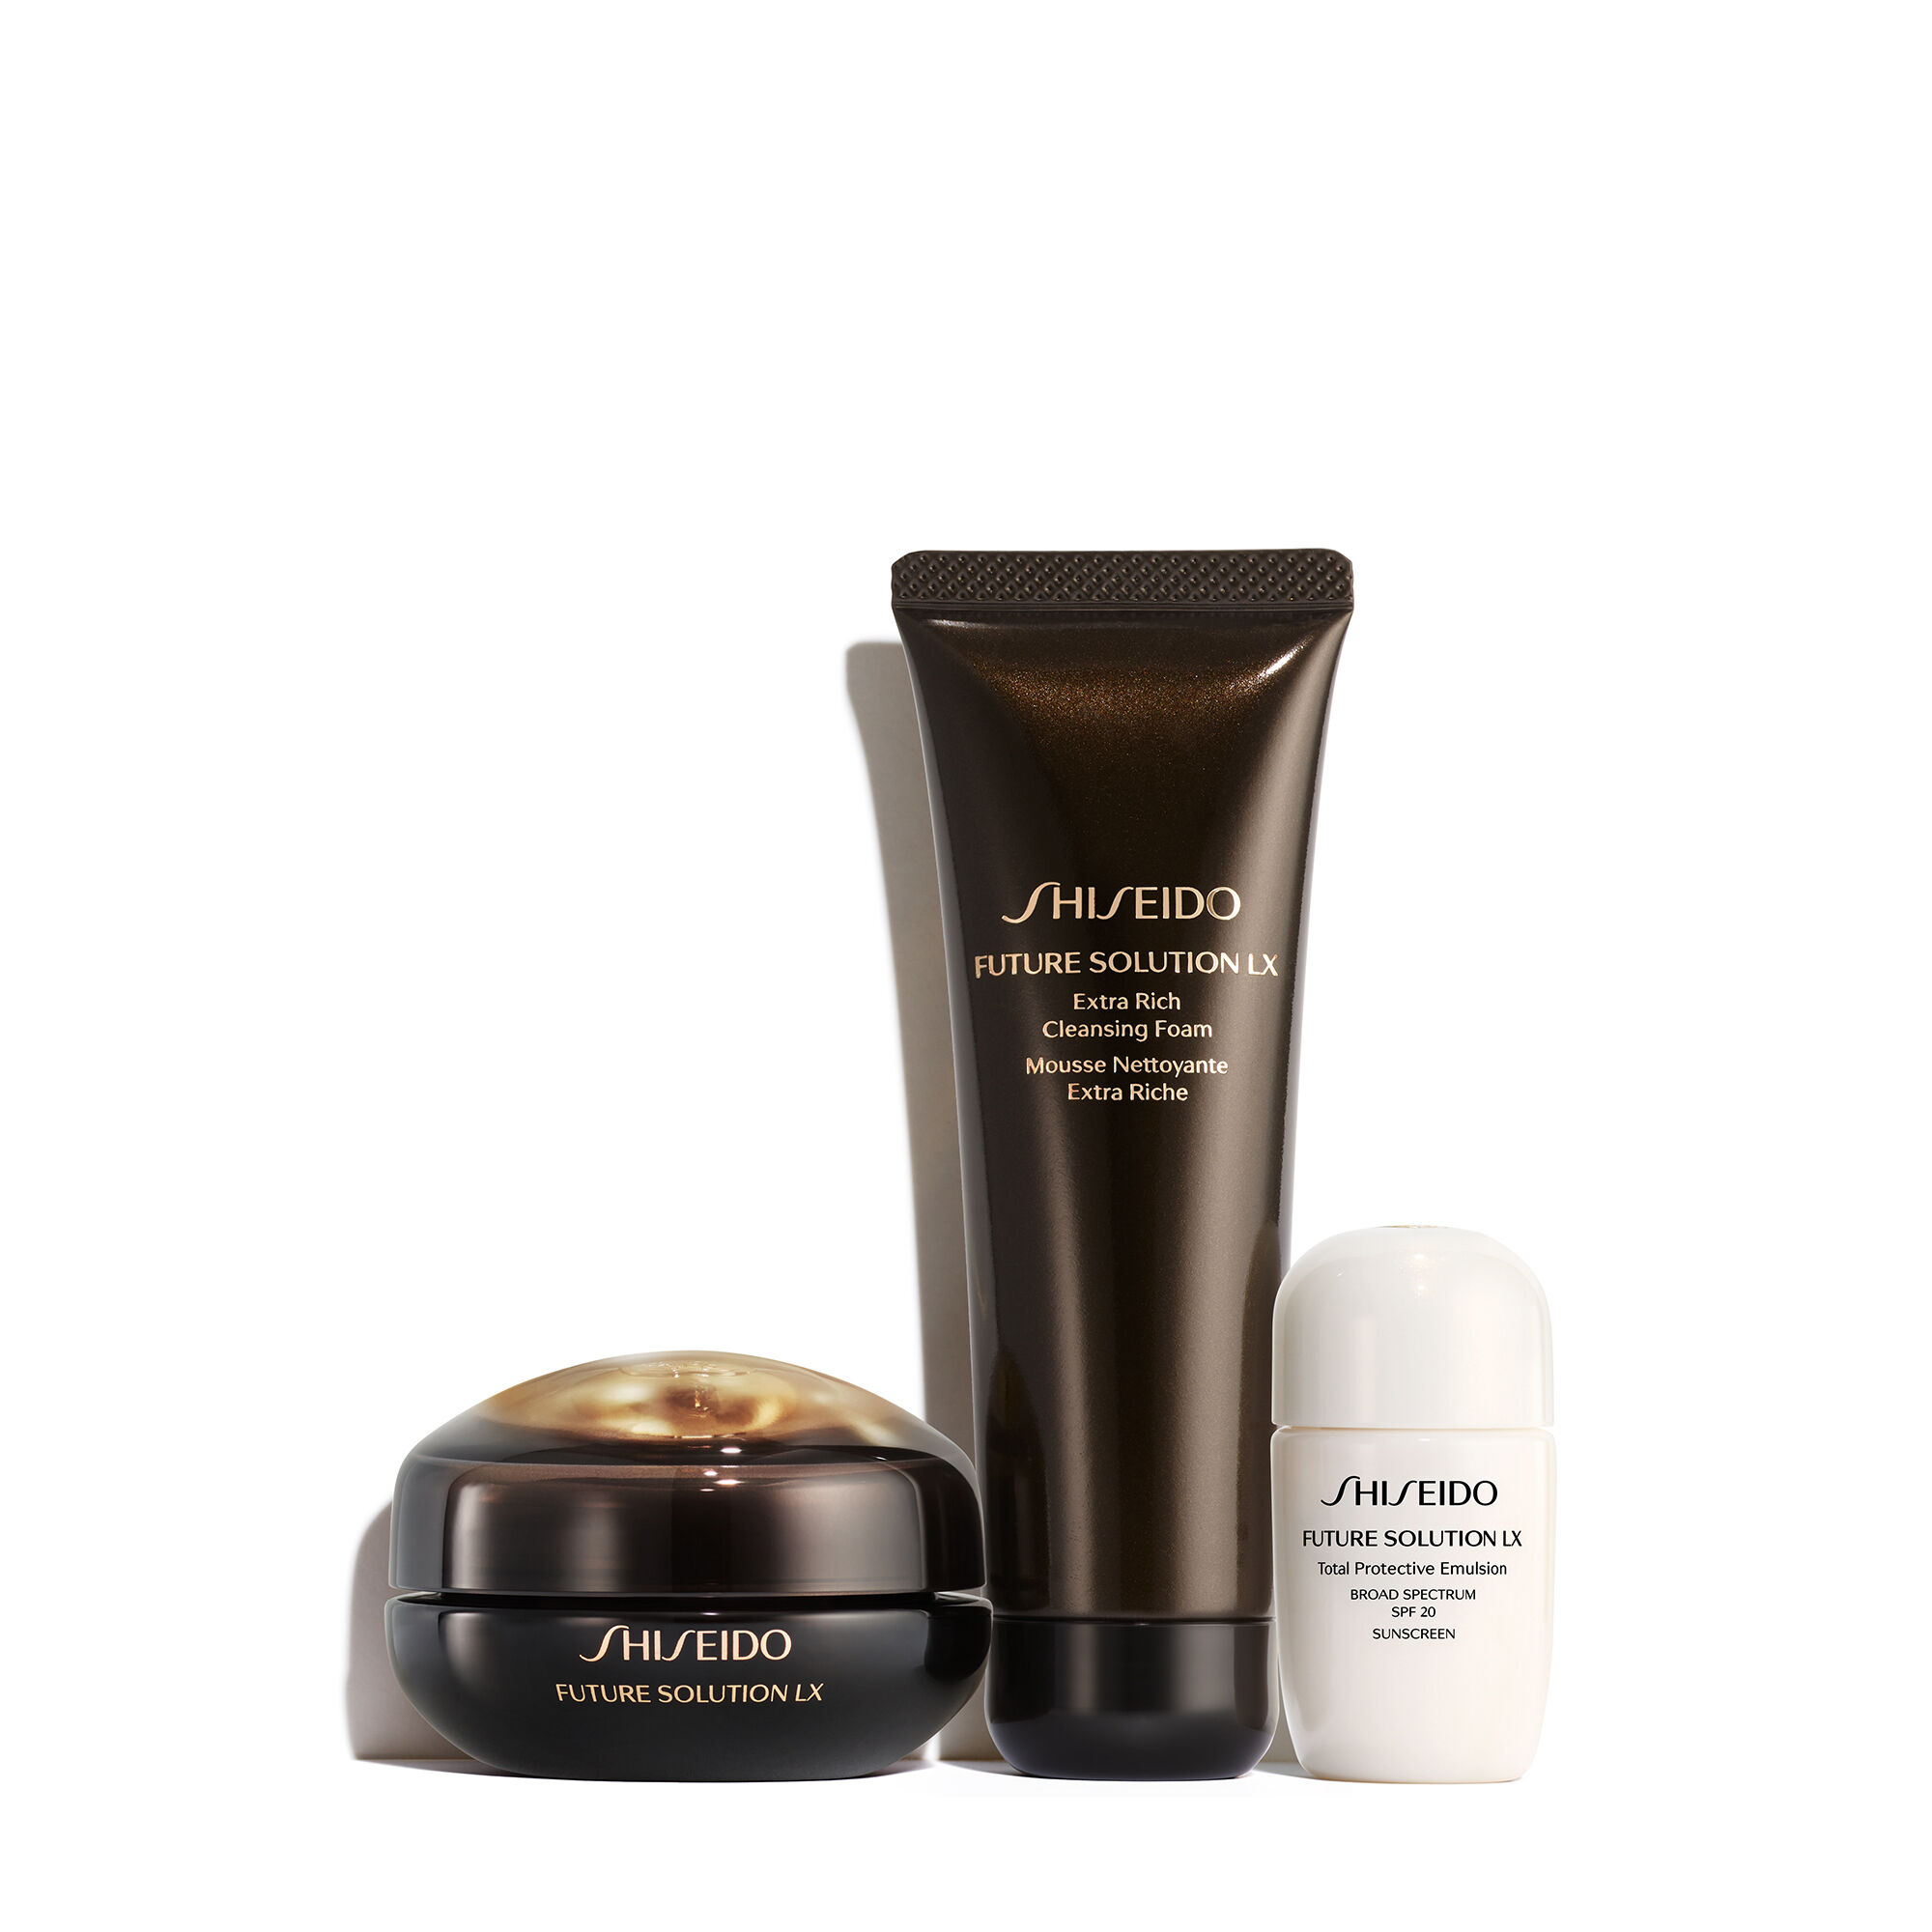 Future Solution LX: Our Best-Selling Anti-Aging Products | SHISEIDO